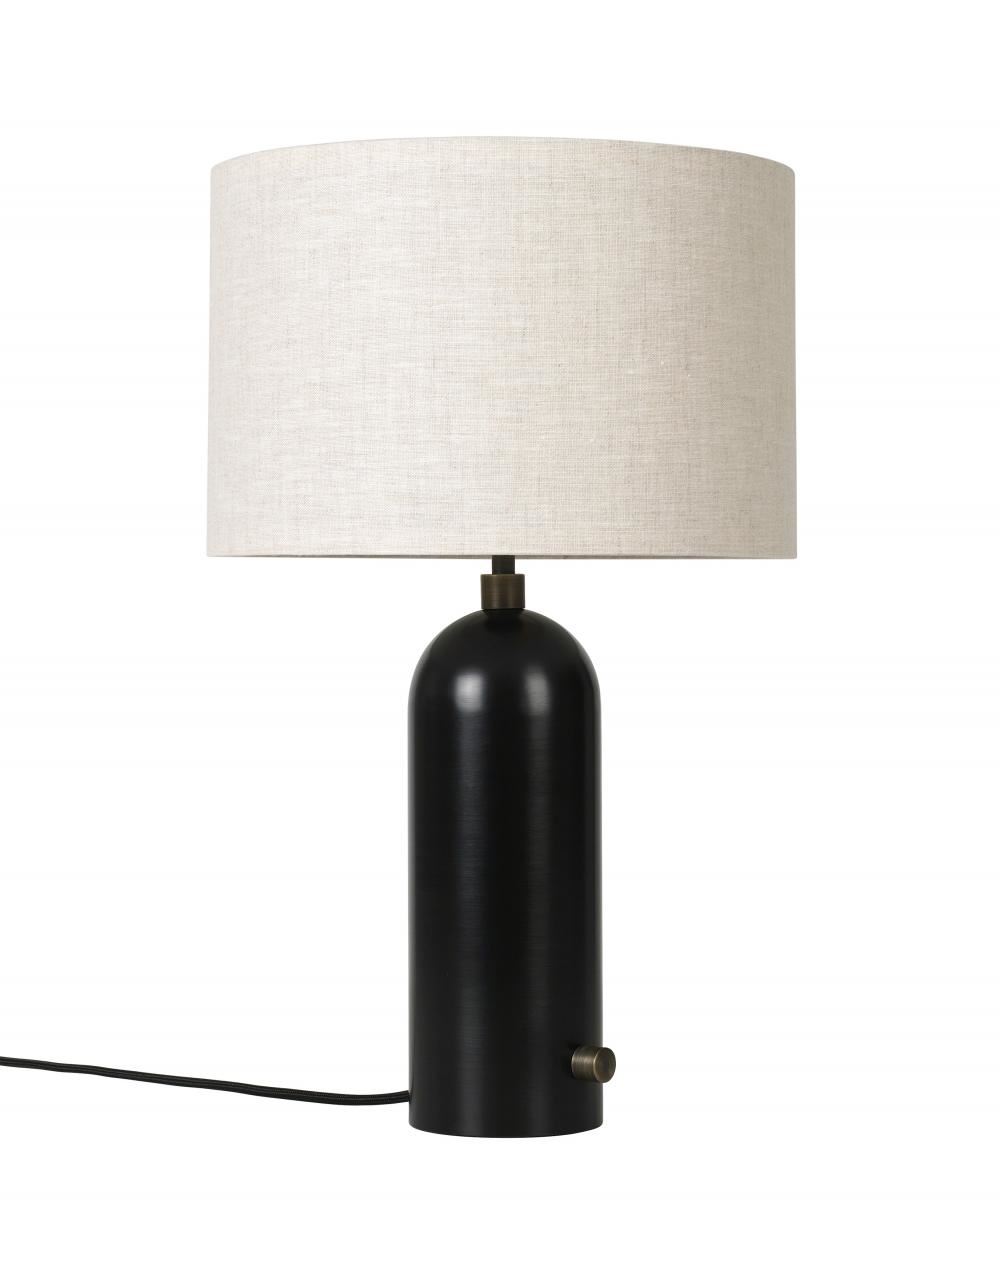 Gravity Table Lamp Small Blackened Steel Canvas Shade